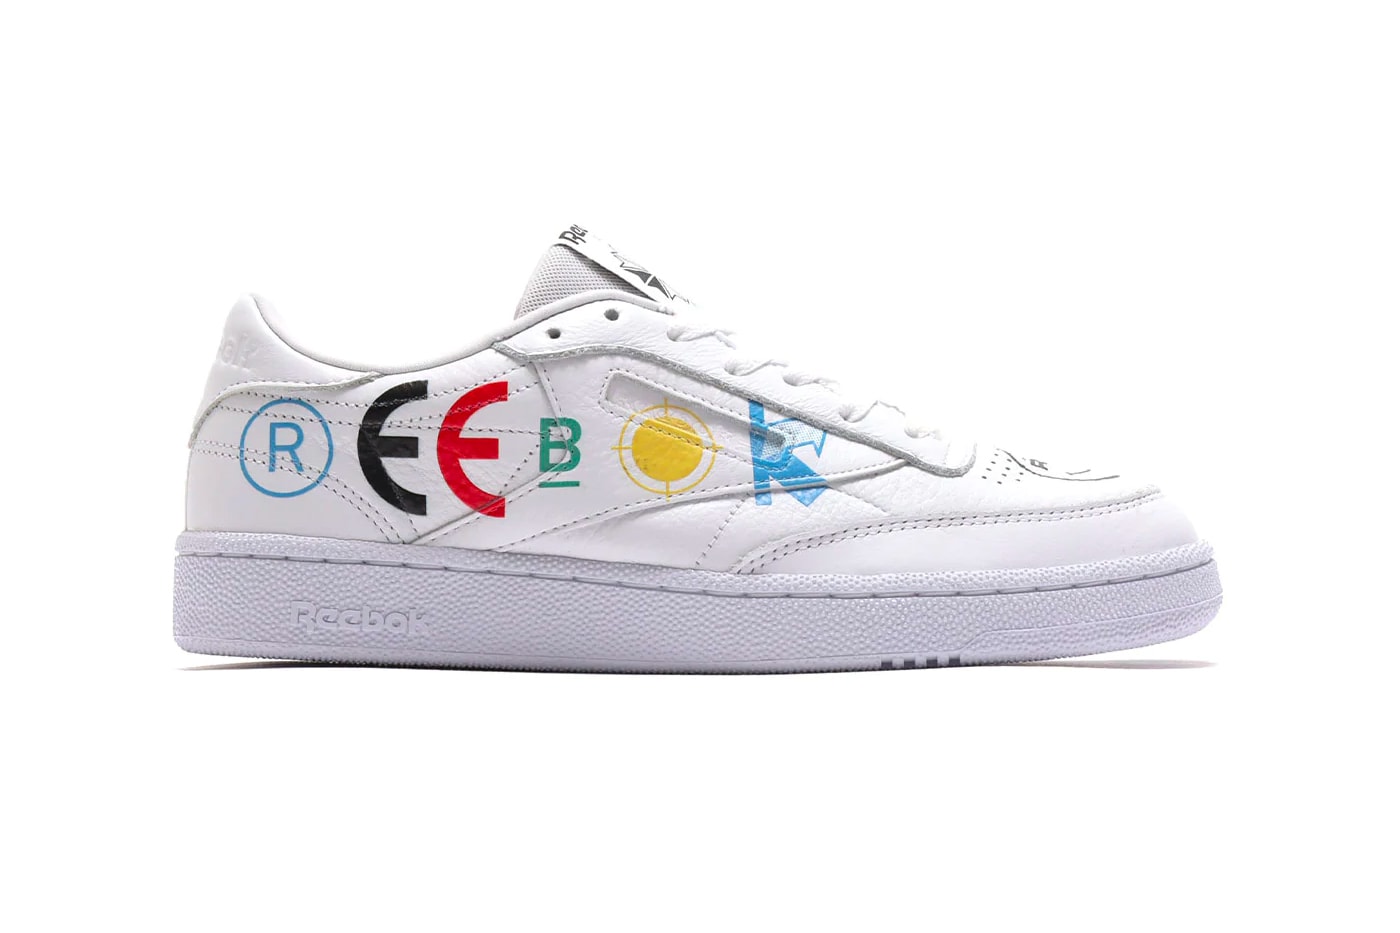 BlackEyePatch Reebok Club C 85 menswear streetwear sneakers shoes kicks trainers runners spring summer 2020 collection collaborations ss20